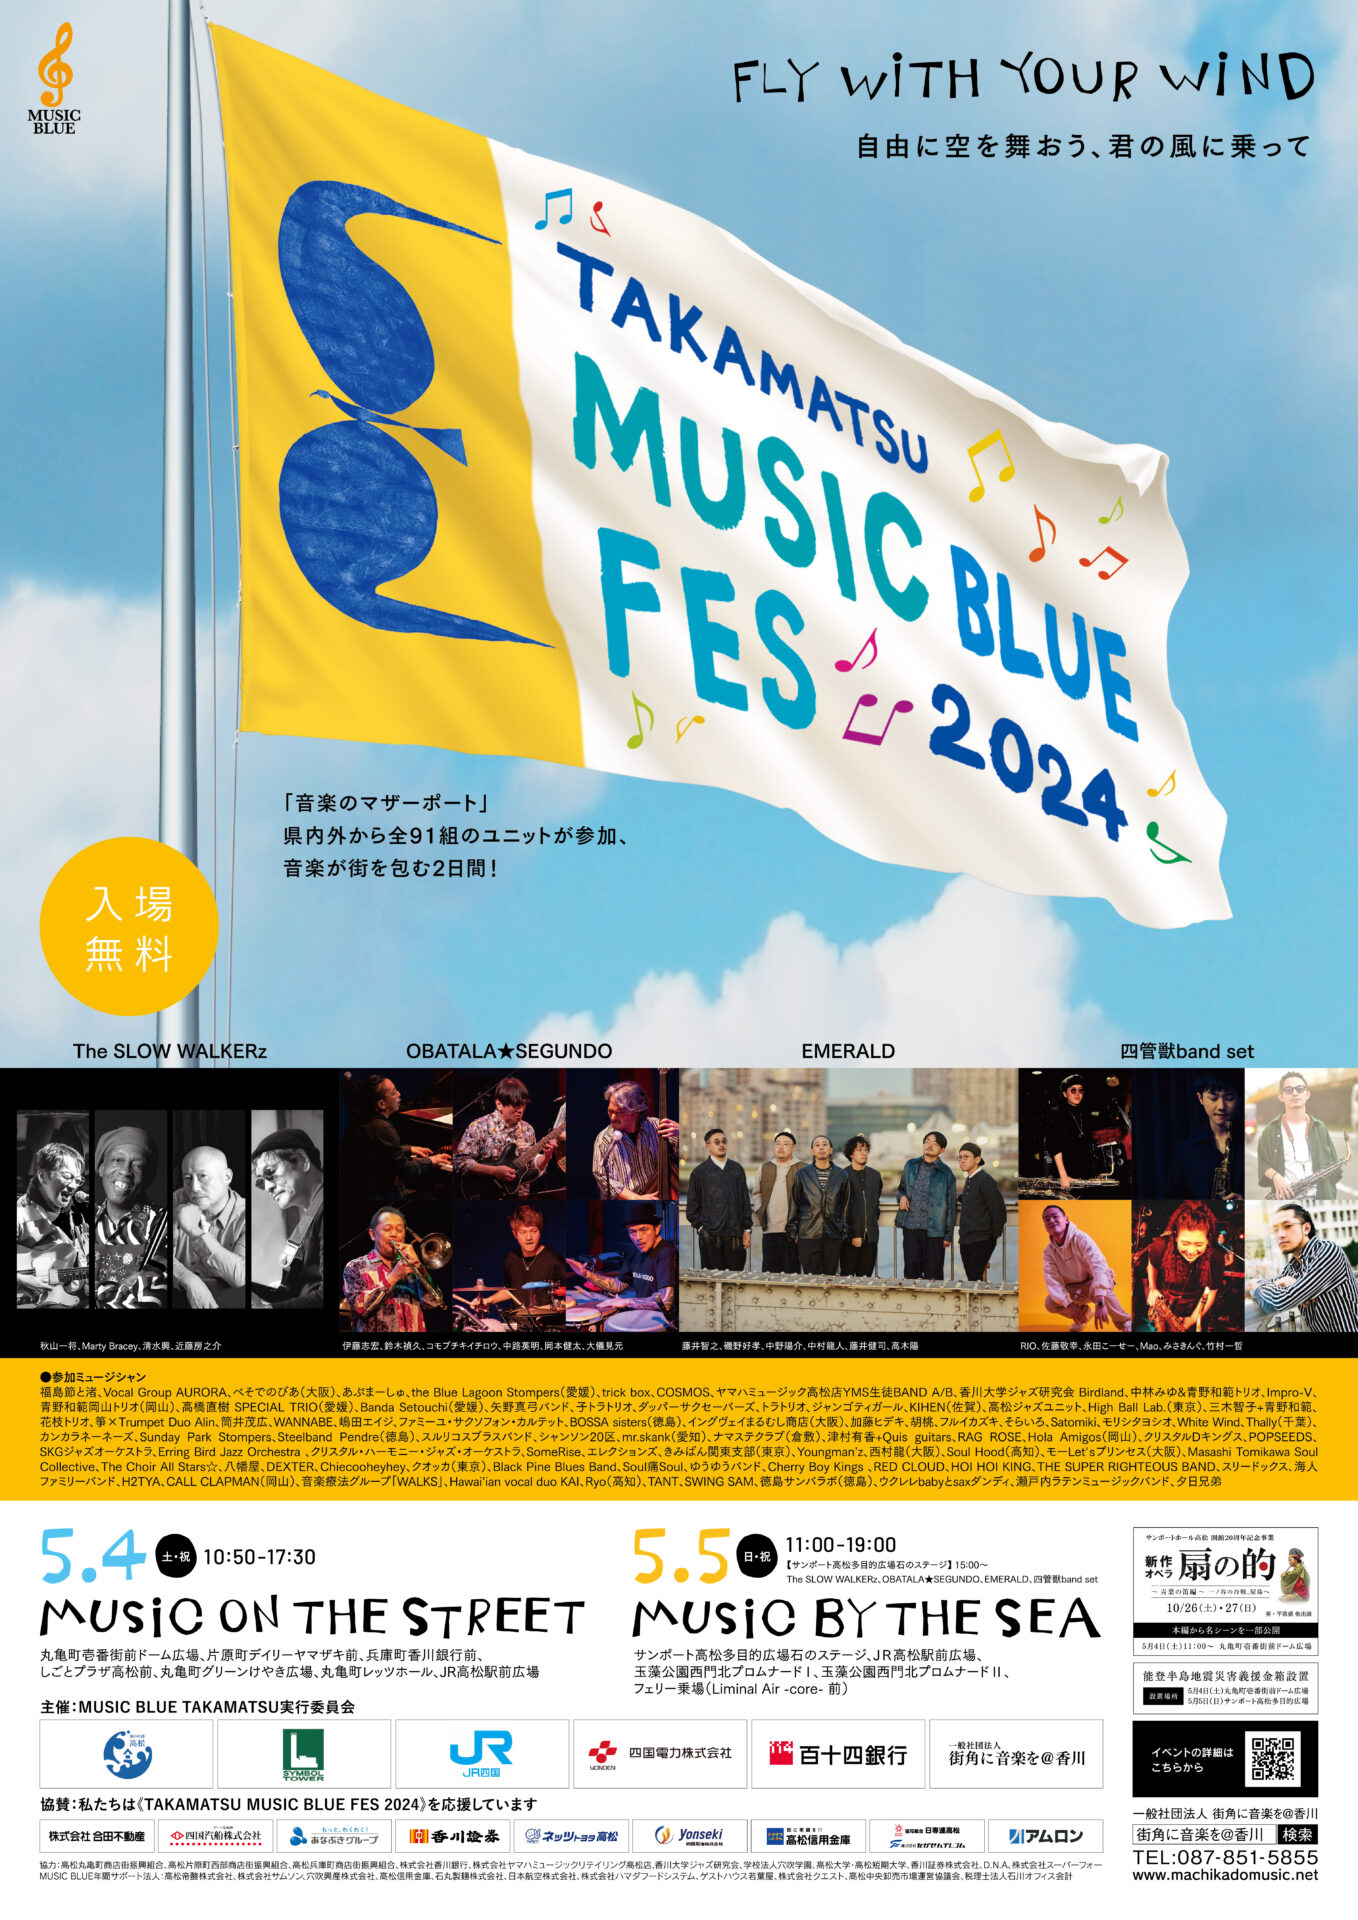 TAKAMATSU MUSIC BLUE FES 2024~Fly with your wind~のサムネイル画像